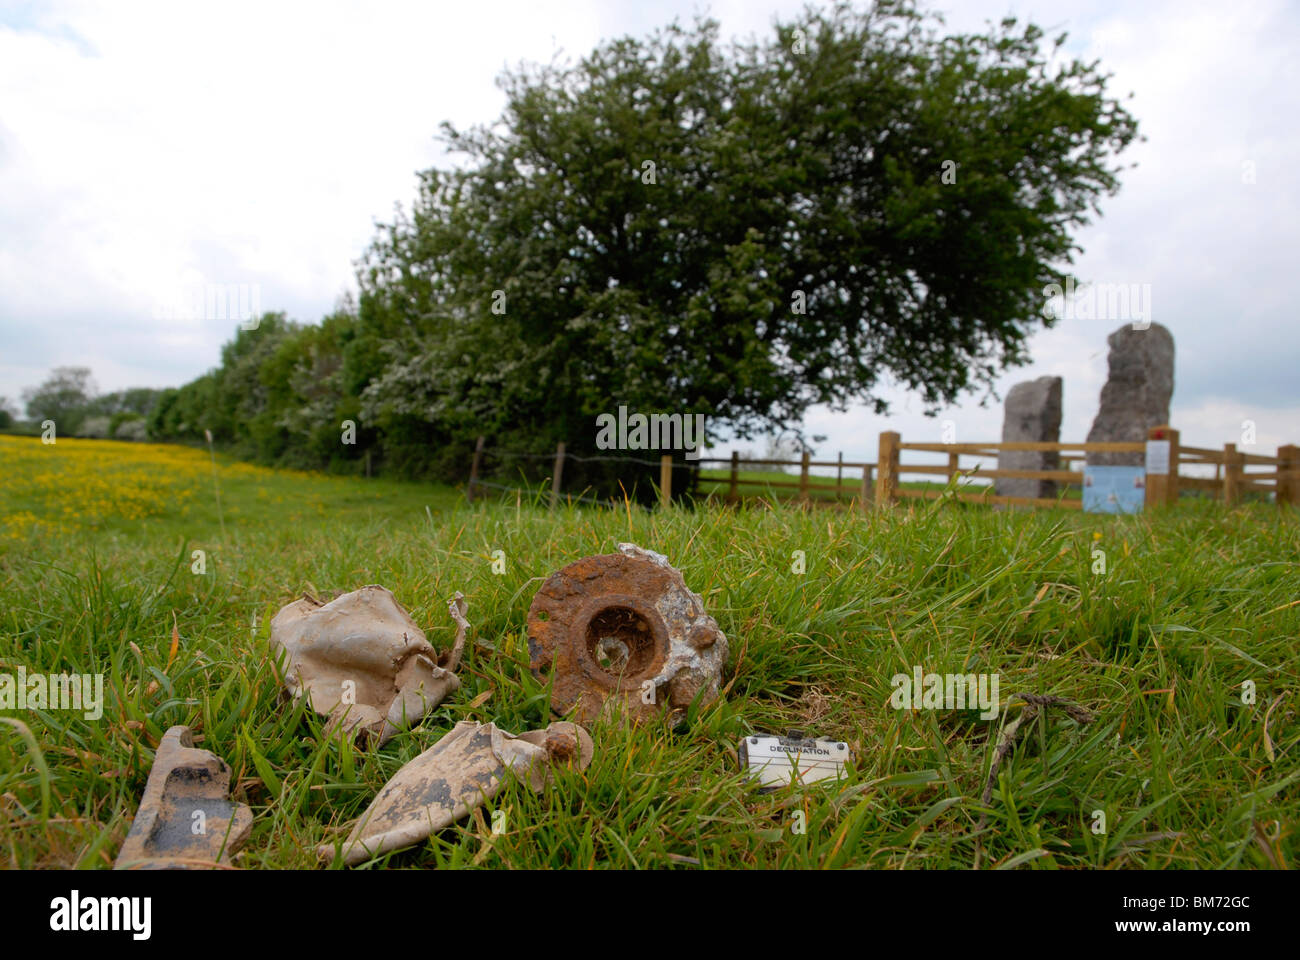 Pieces of crashed aircraft at the spot at Hoveringham Pastures, Notts., where two Lancaster bombers crashed during WWII Stock Photo